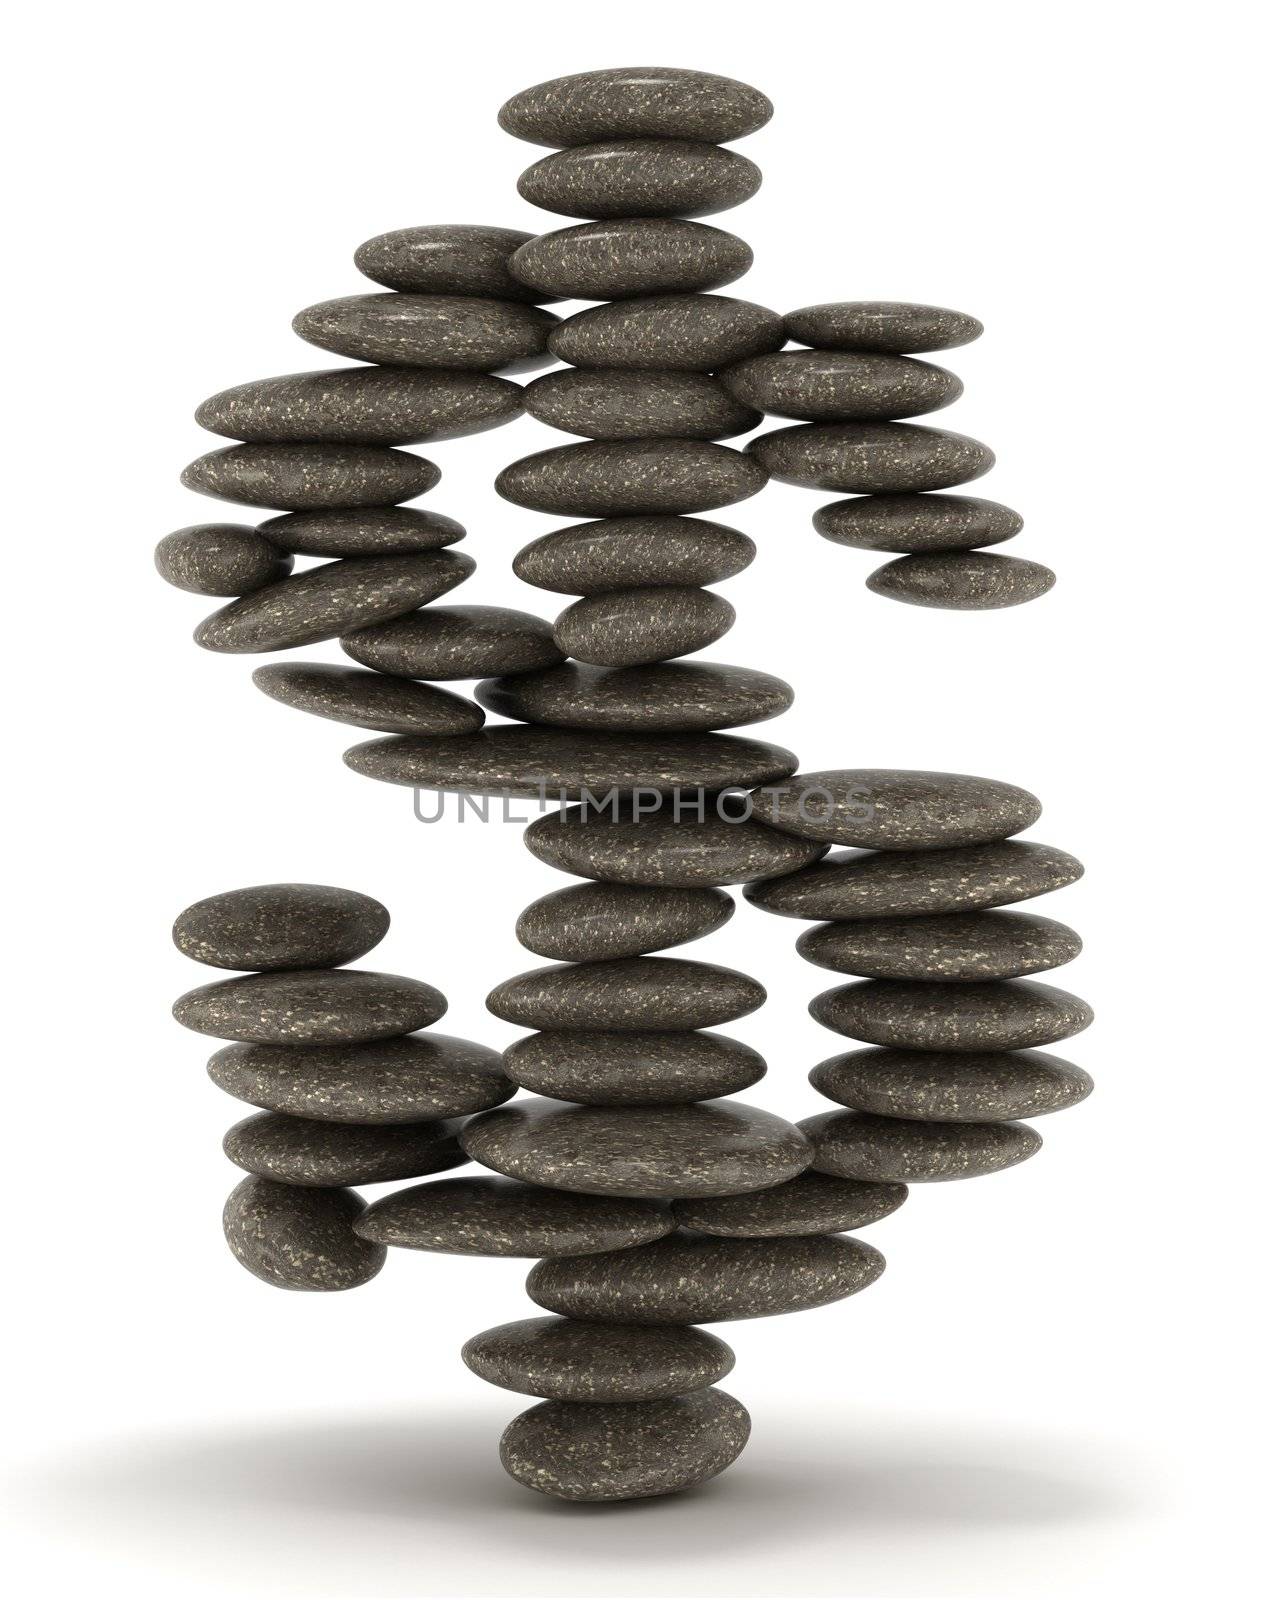 Pebble tower shaped as dollar sign by Arsgera